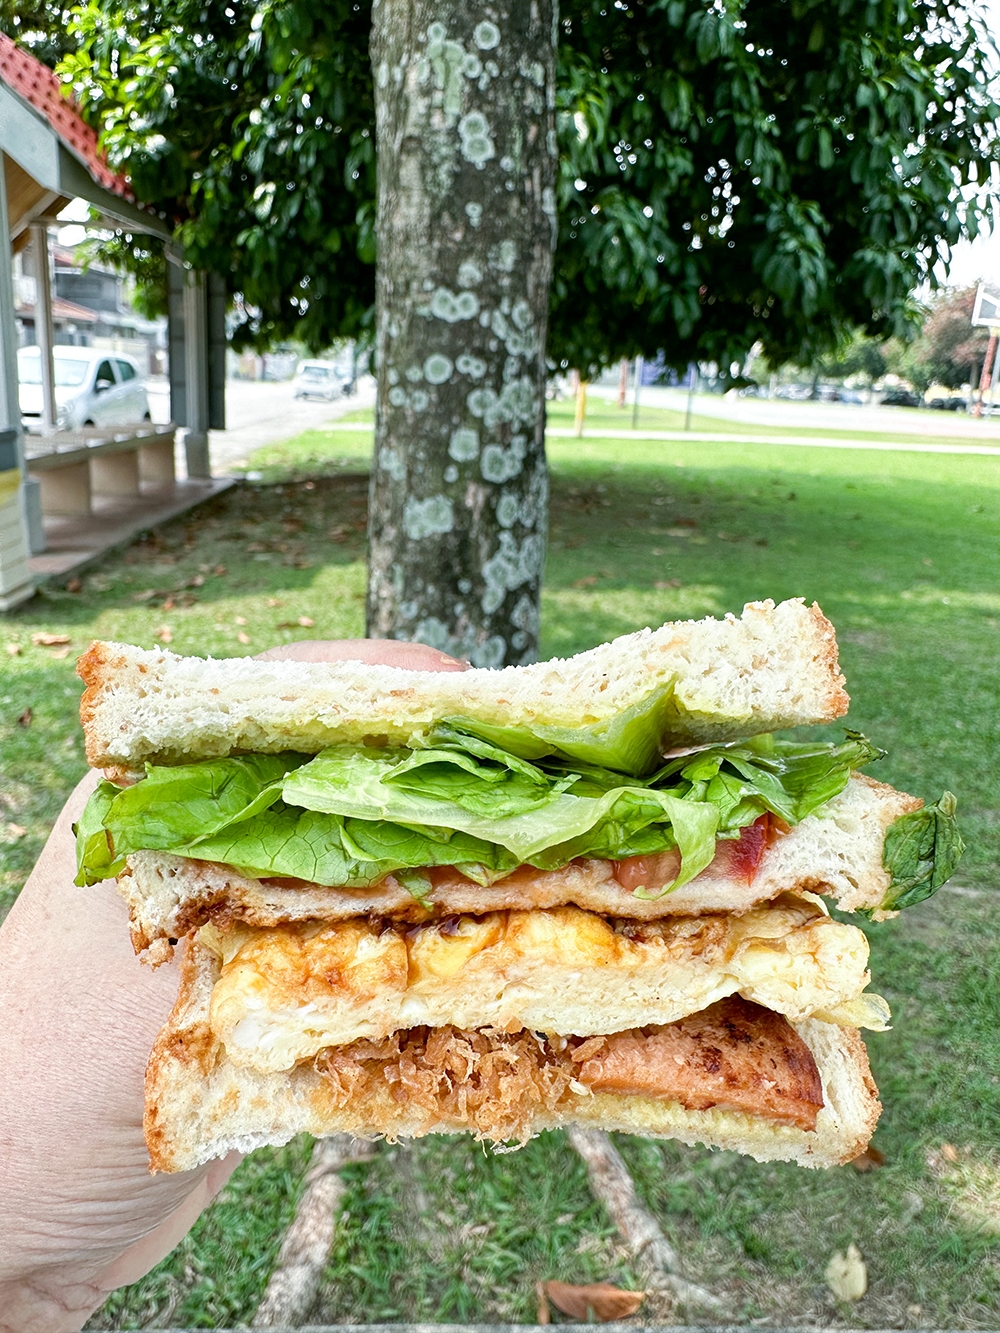 The signature egg sandwich has layers of vegetarian ham and vegetarian meat floss with egg, vegetables and that distinct sweet Taiwanese sauce